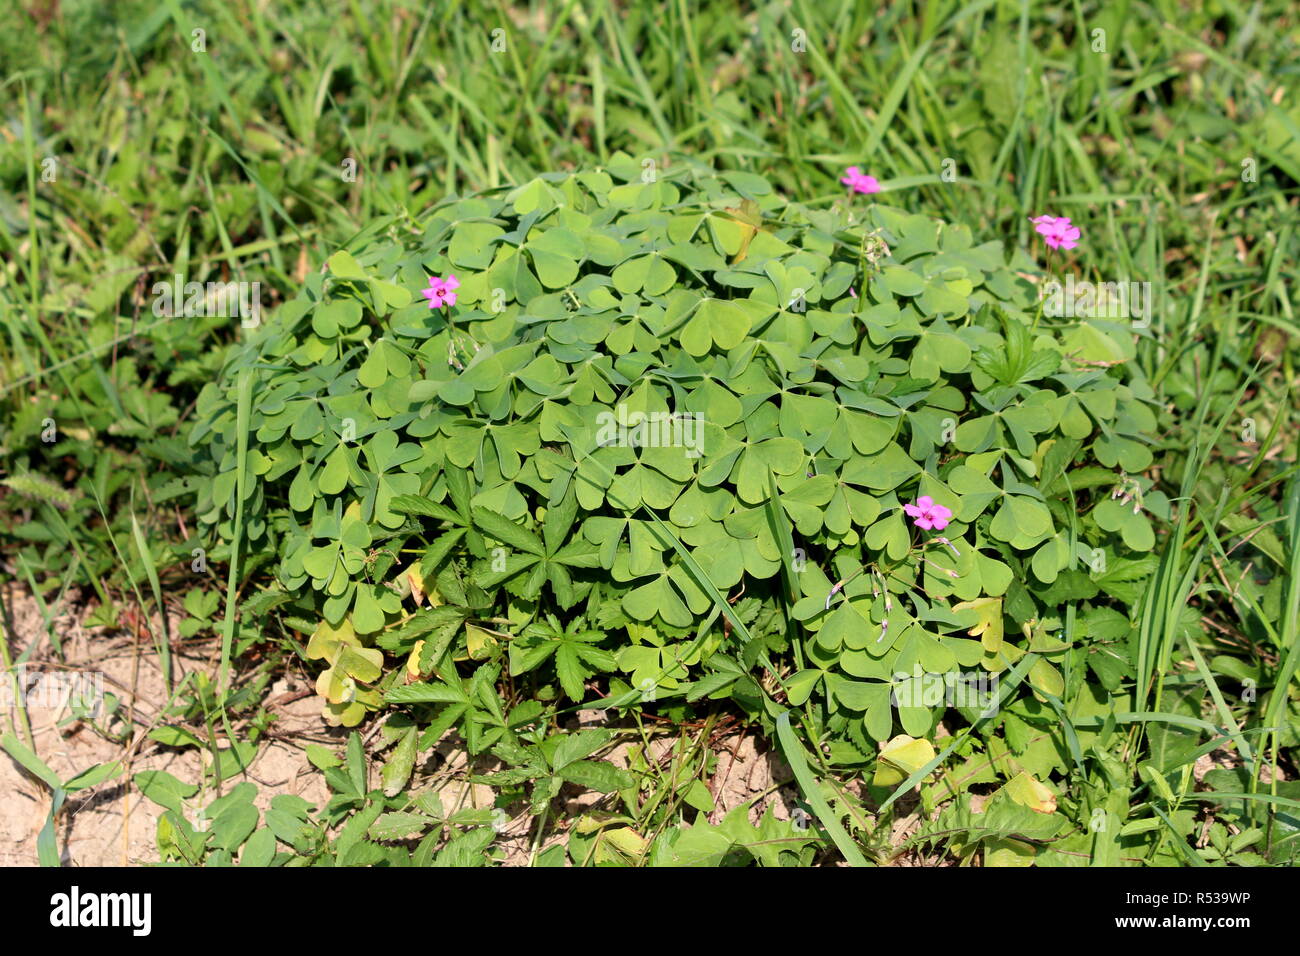 Pink sorrel or Oxalis articulata or Windowbox wood sorrel flowering plant shaped like small bush with dense green leaves and few fully open flowers Stock Photo